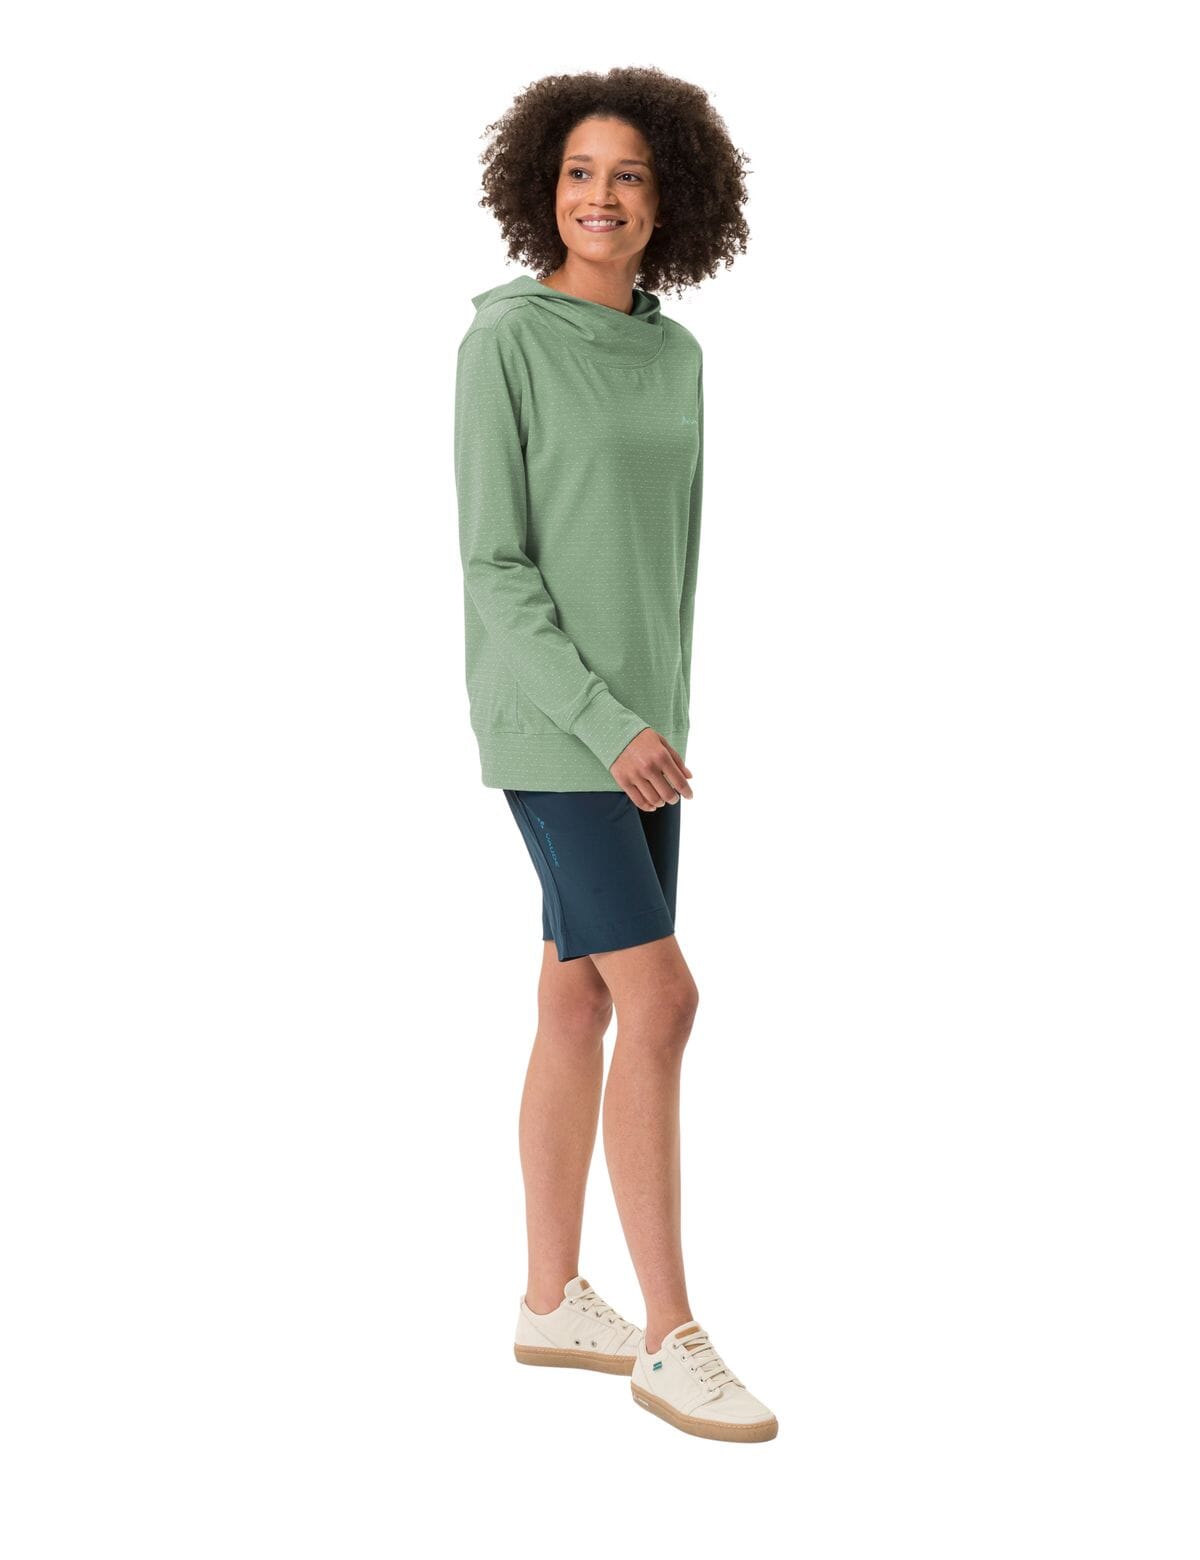 Vaude W's Tuenno Pullover - Organic Cotton & Recycled Polyester Willow Green Shirt